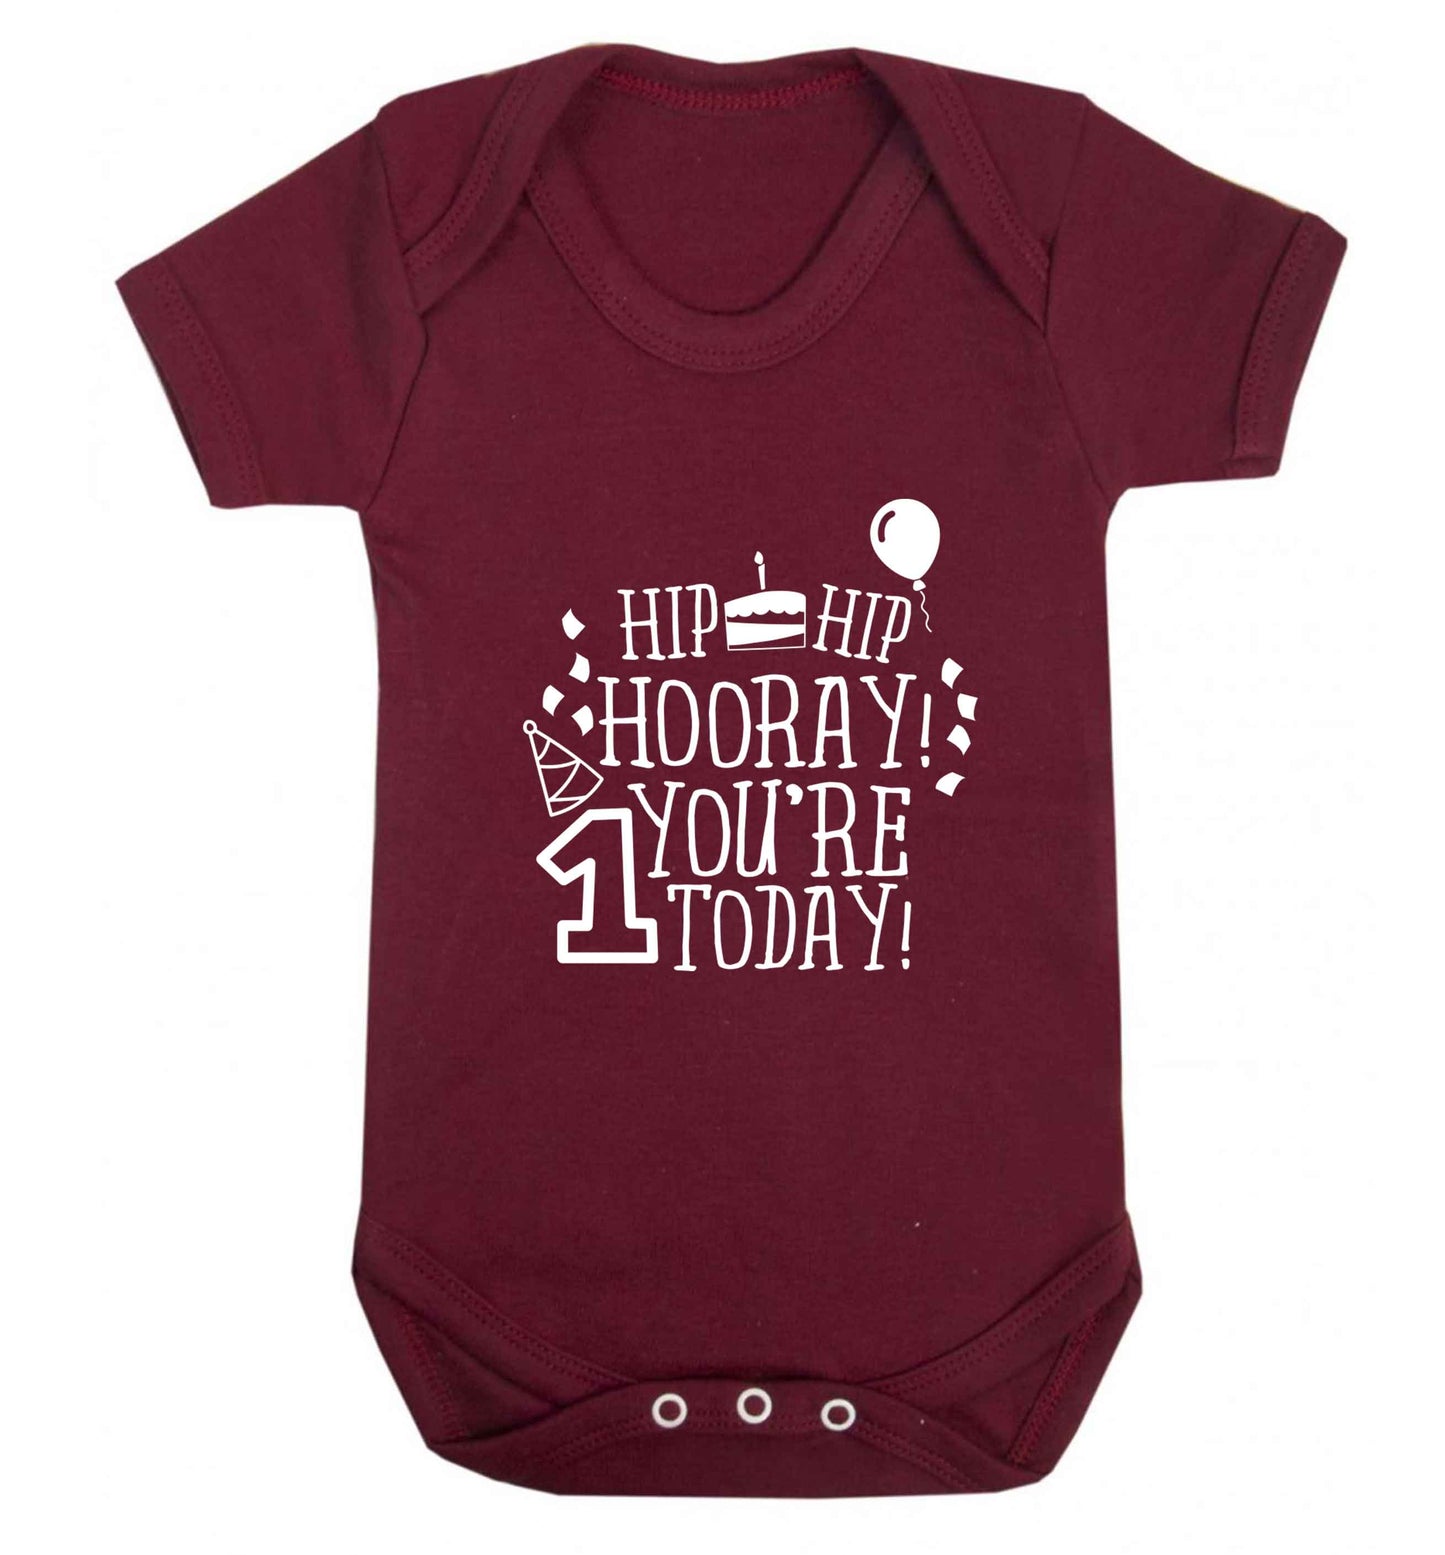 You're one today baby vest maroon 18-24 months